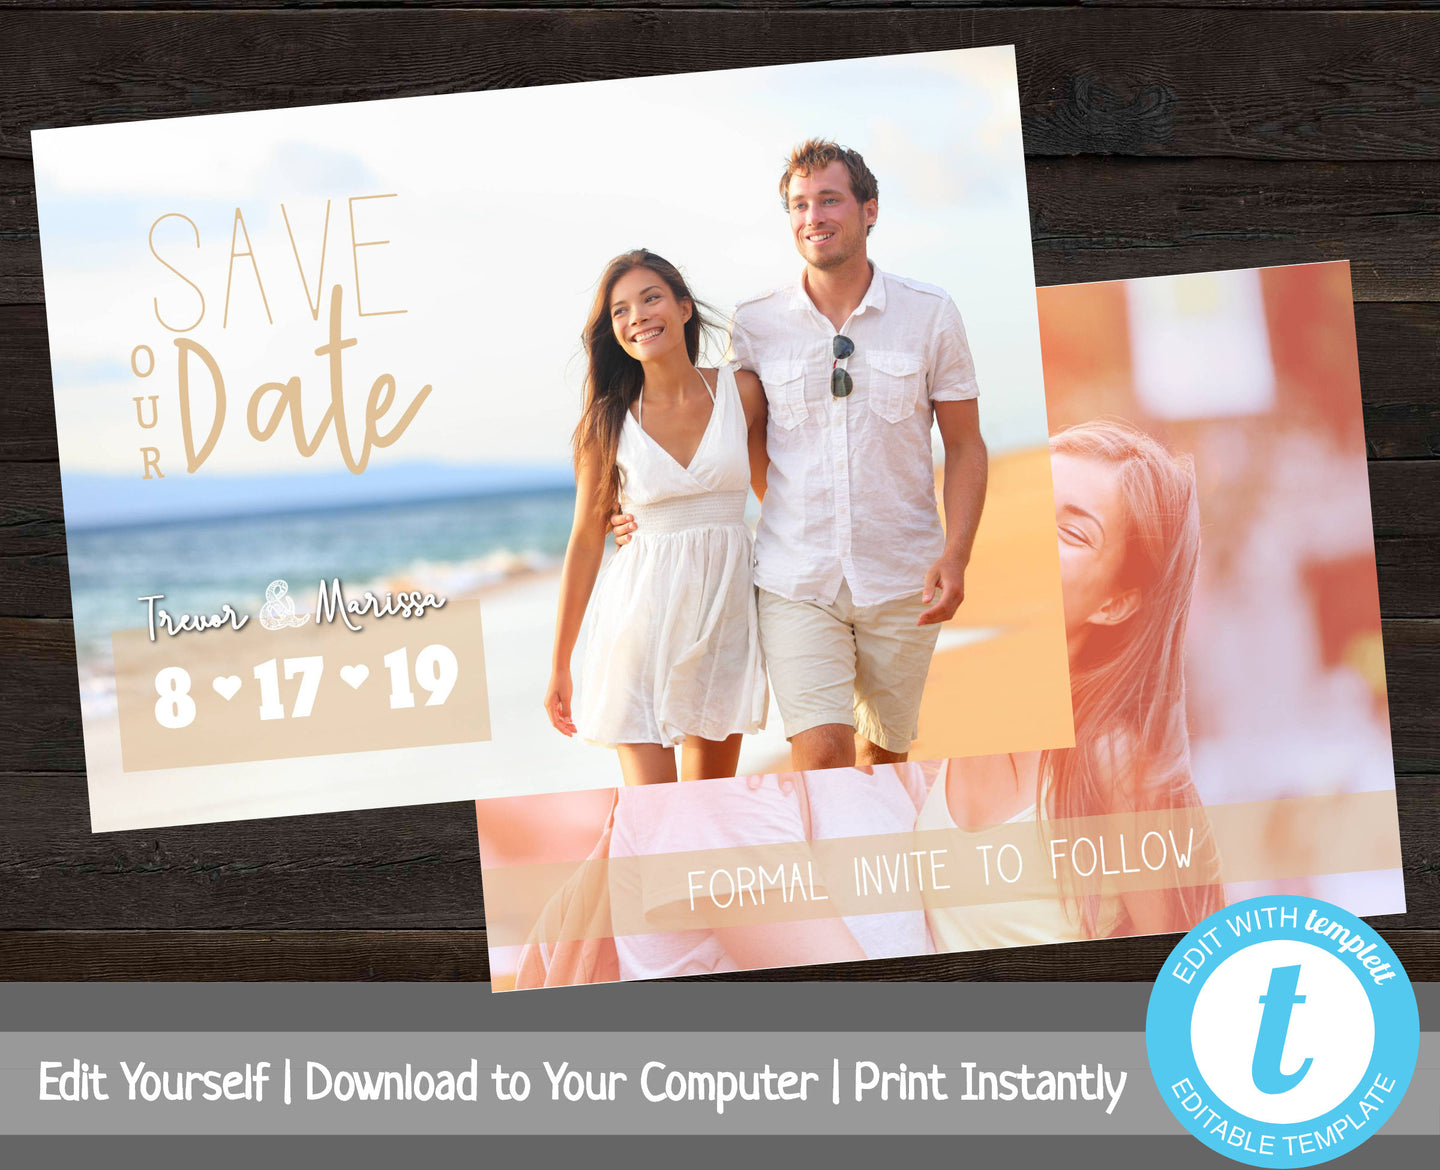 Printable Save the Date Cards, Save the Date Photo Template, Save Our Date, Wedding Date Announcement, Modern Save the Date Card, Editable